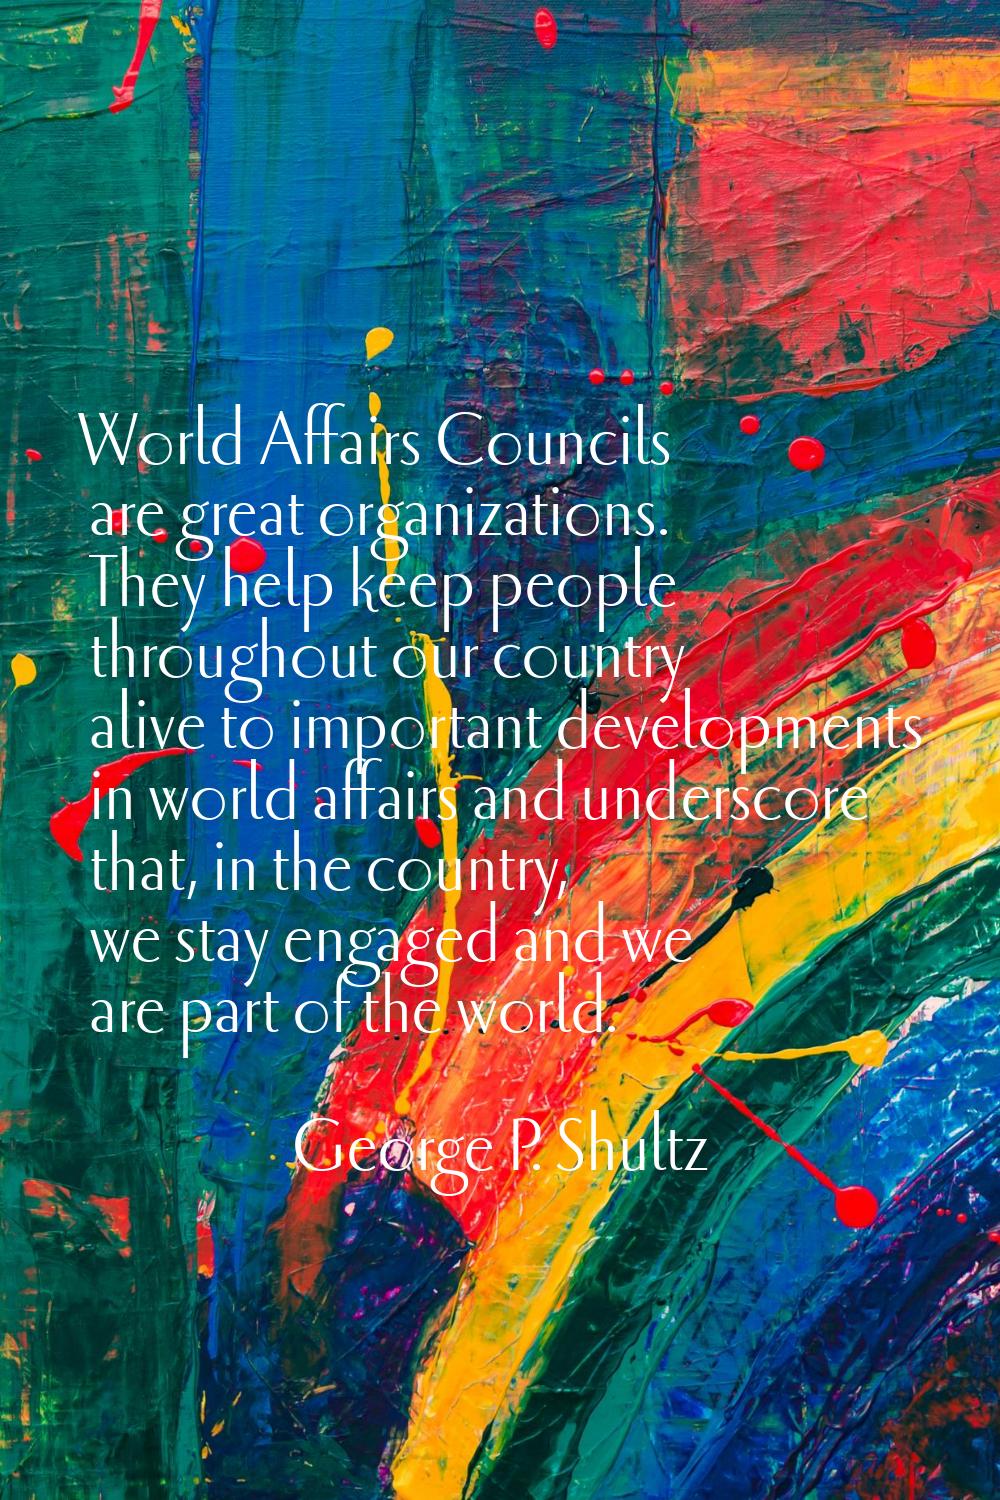 World Affairs Councils are great organizations. They help keep people throughout our country alive 